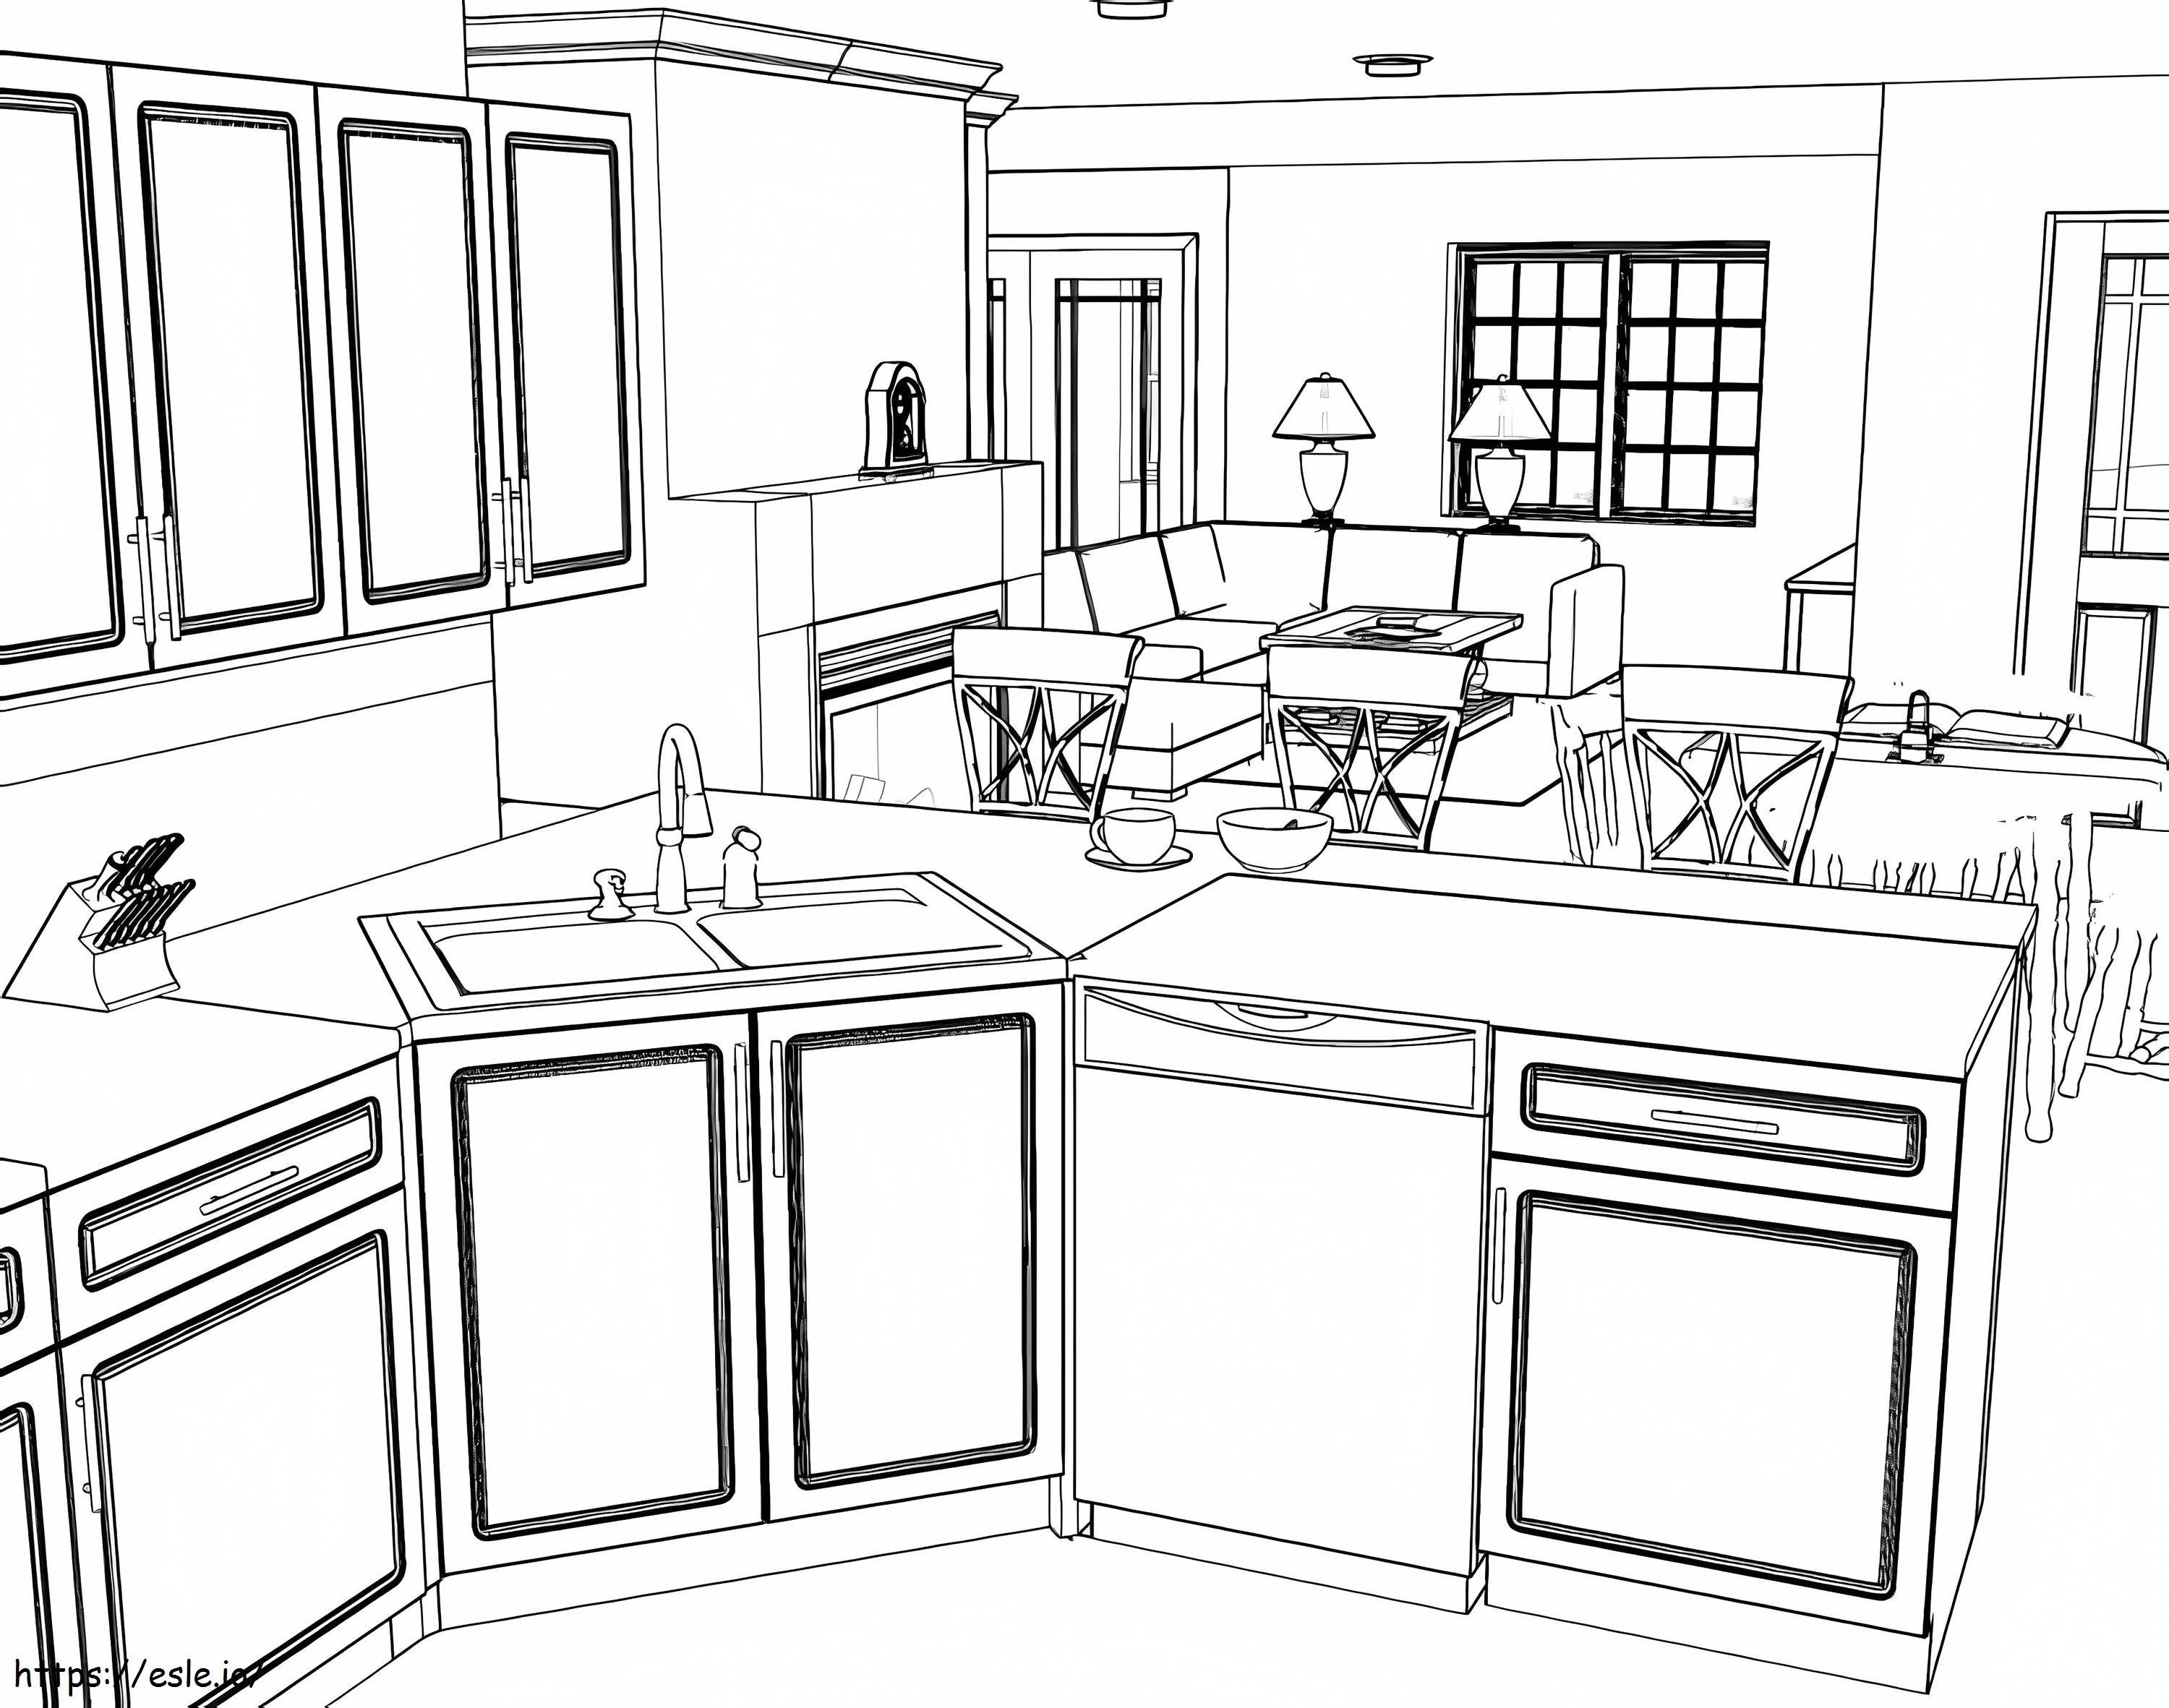 Good Kitchen coloring page